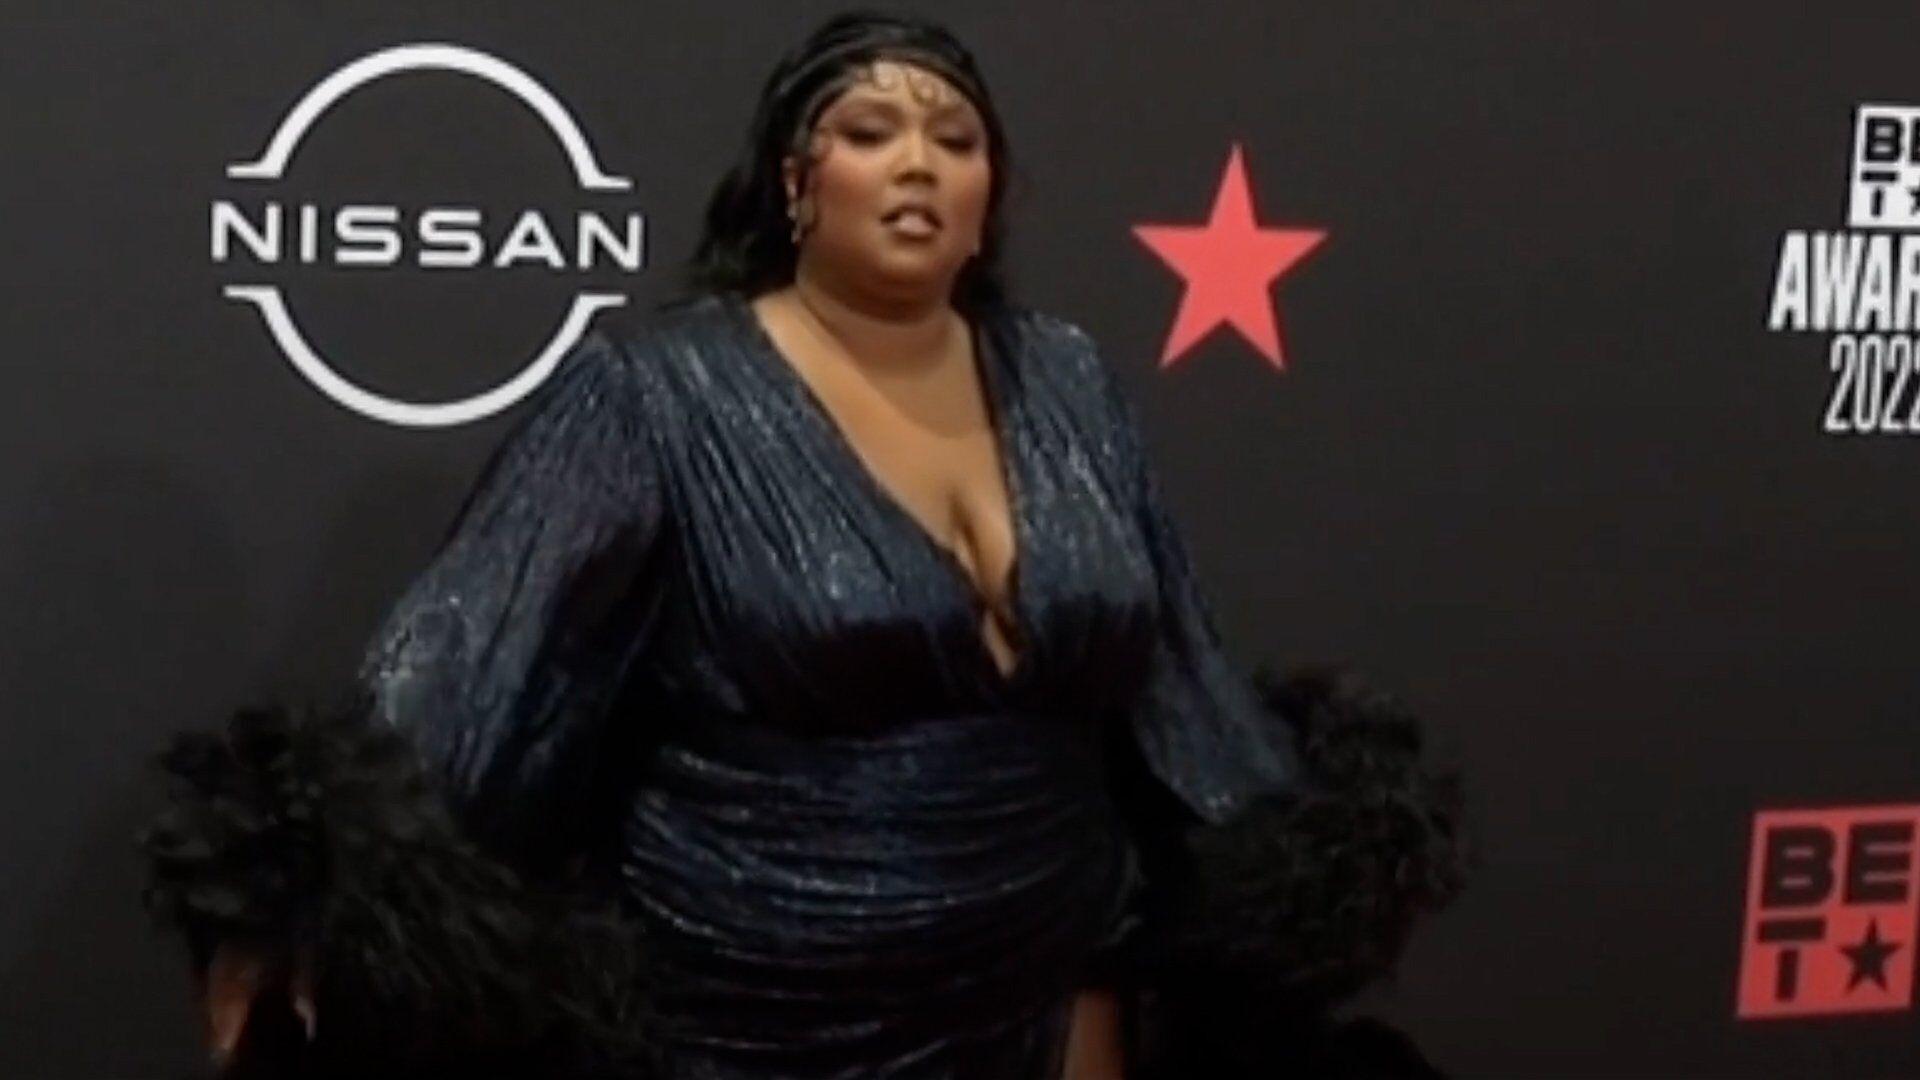 Lizzo's Big Grrrls Rally In a Big Show of Support for Singer